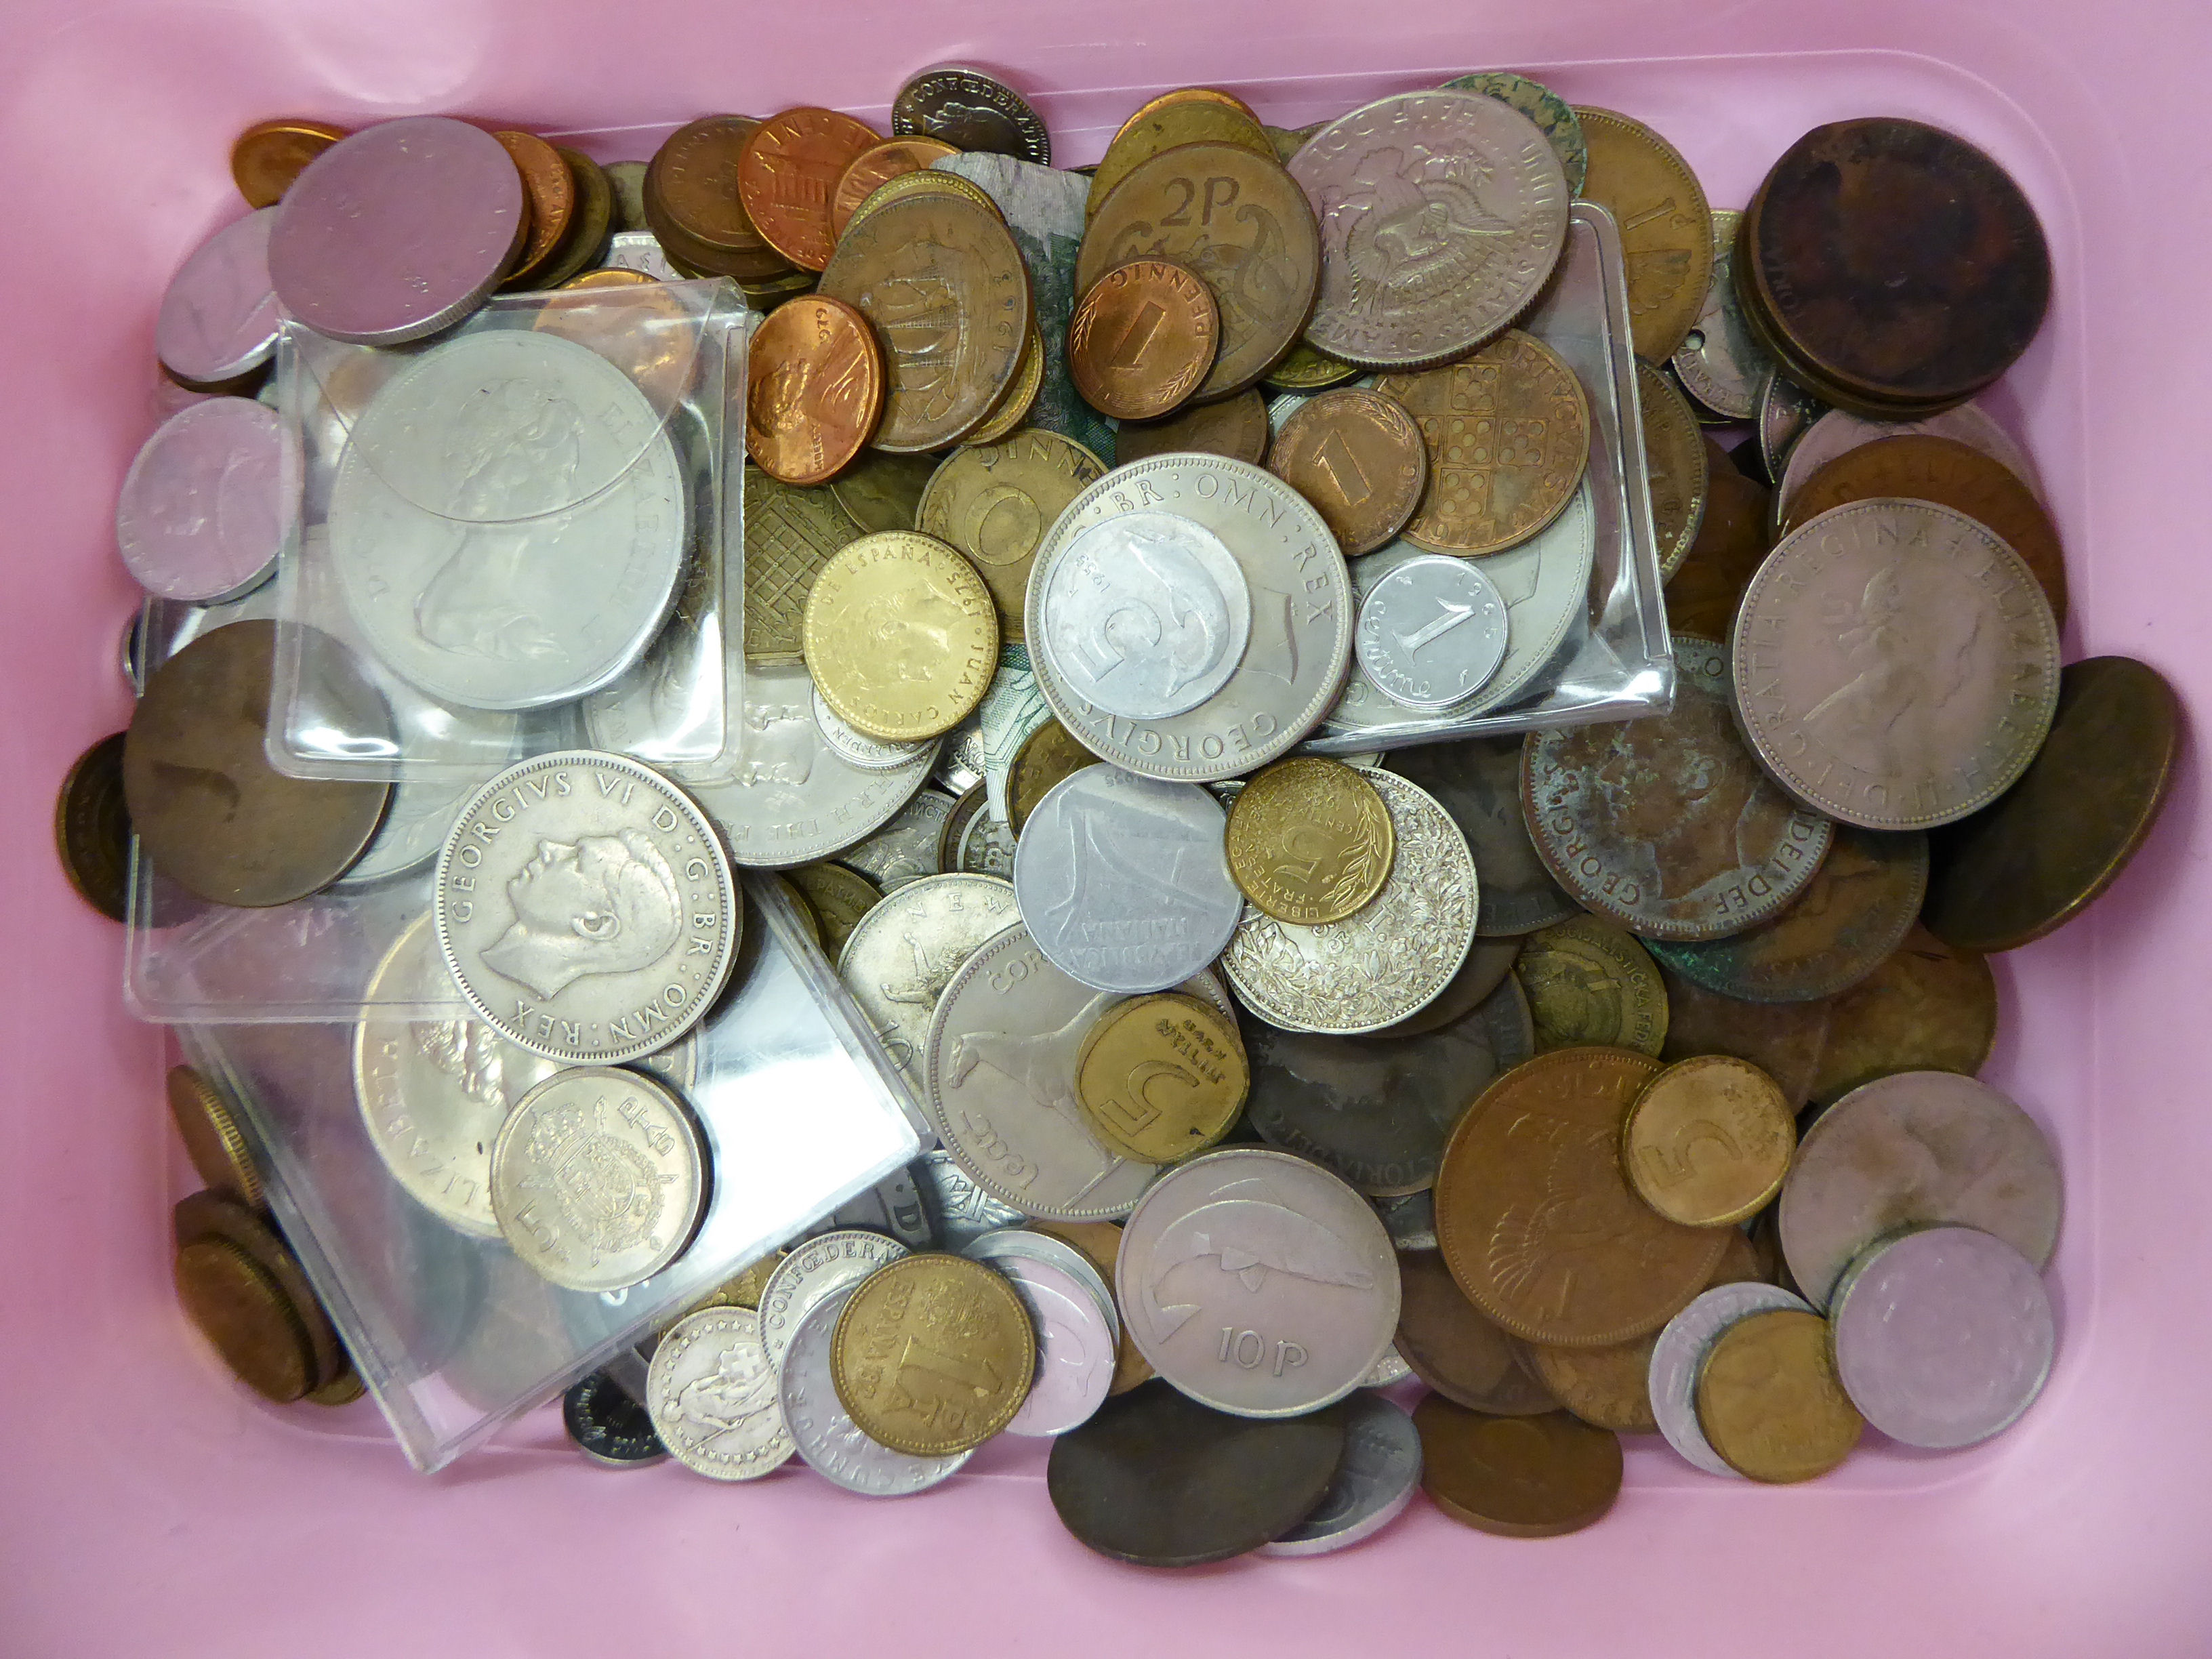 Uncollated British and foreign coins and banknotes: to include francs, cents,